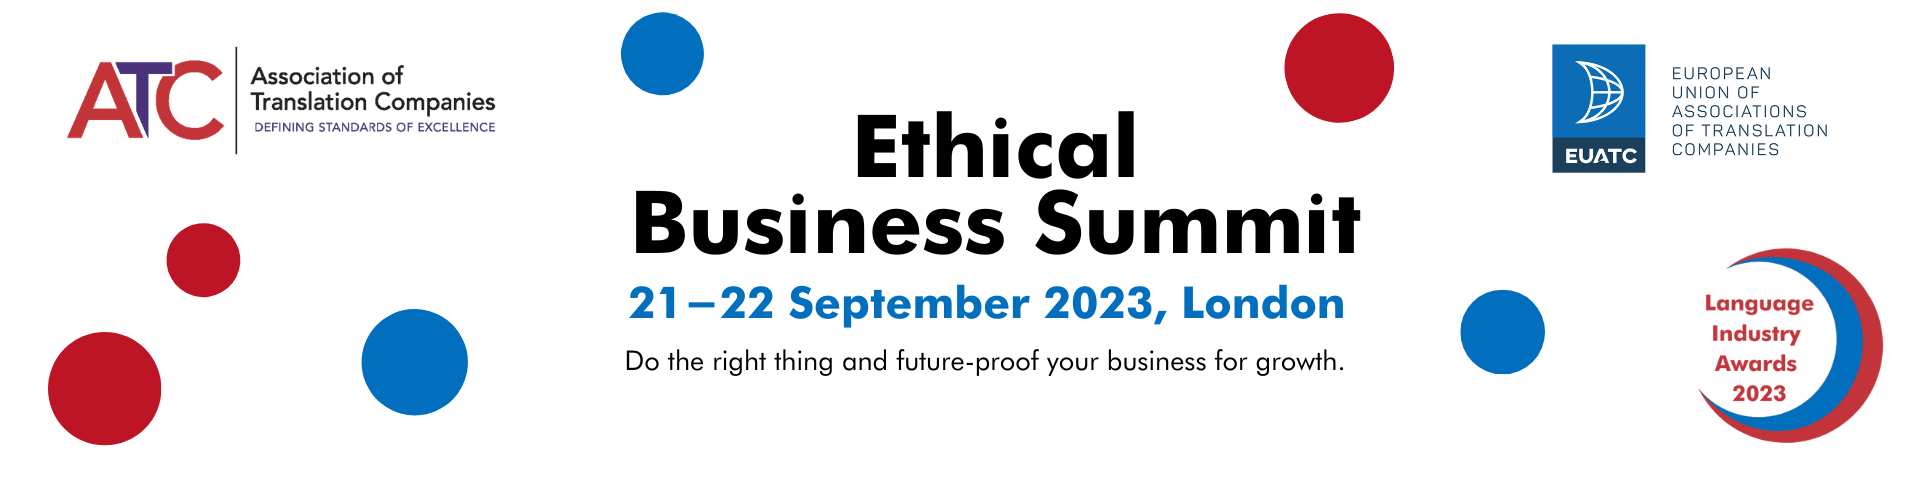 The image shows a banner with the ATC and EUATC logos and the following wording: Ethical Business Summit, 21st and 22nd September 2023 in London. Do the right thing and future-proof your business.